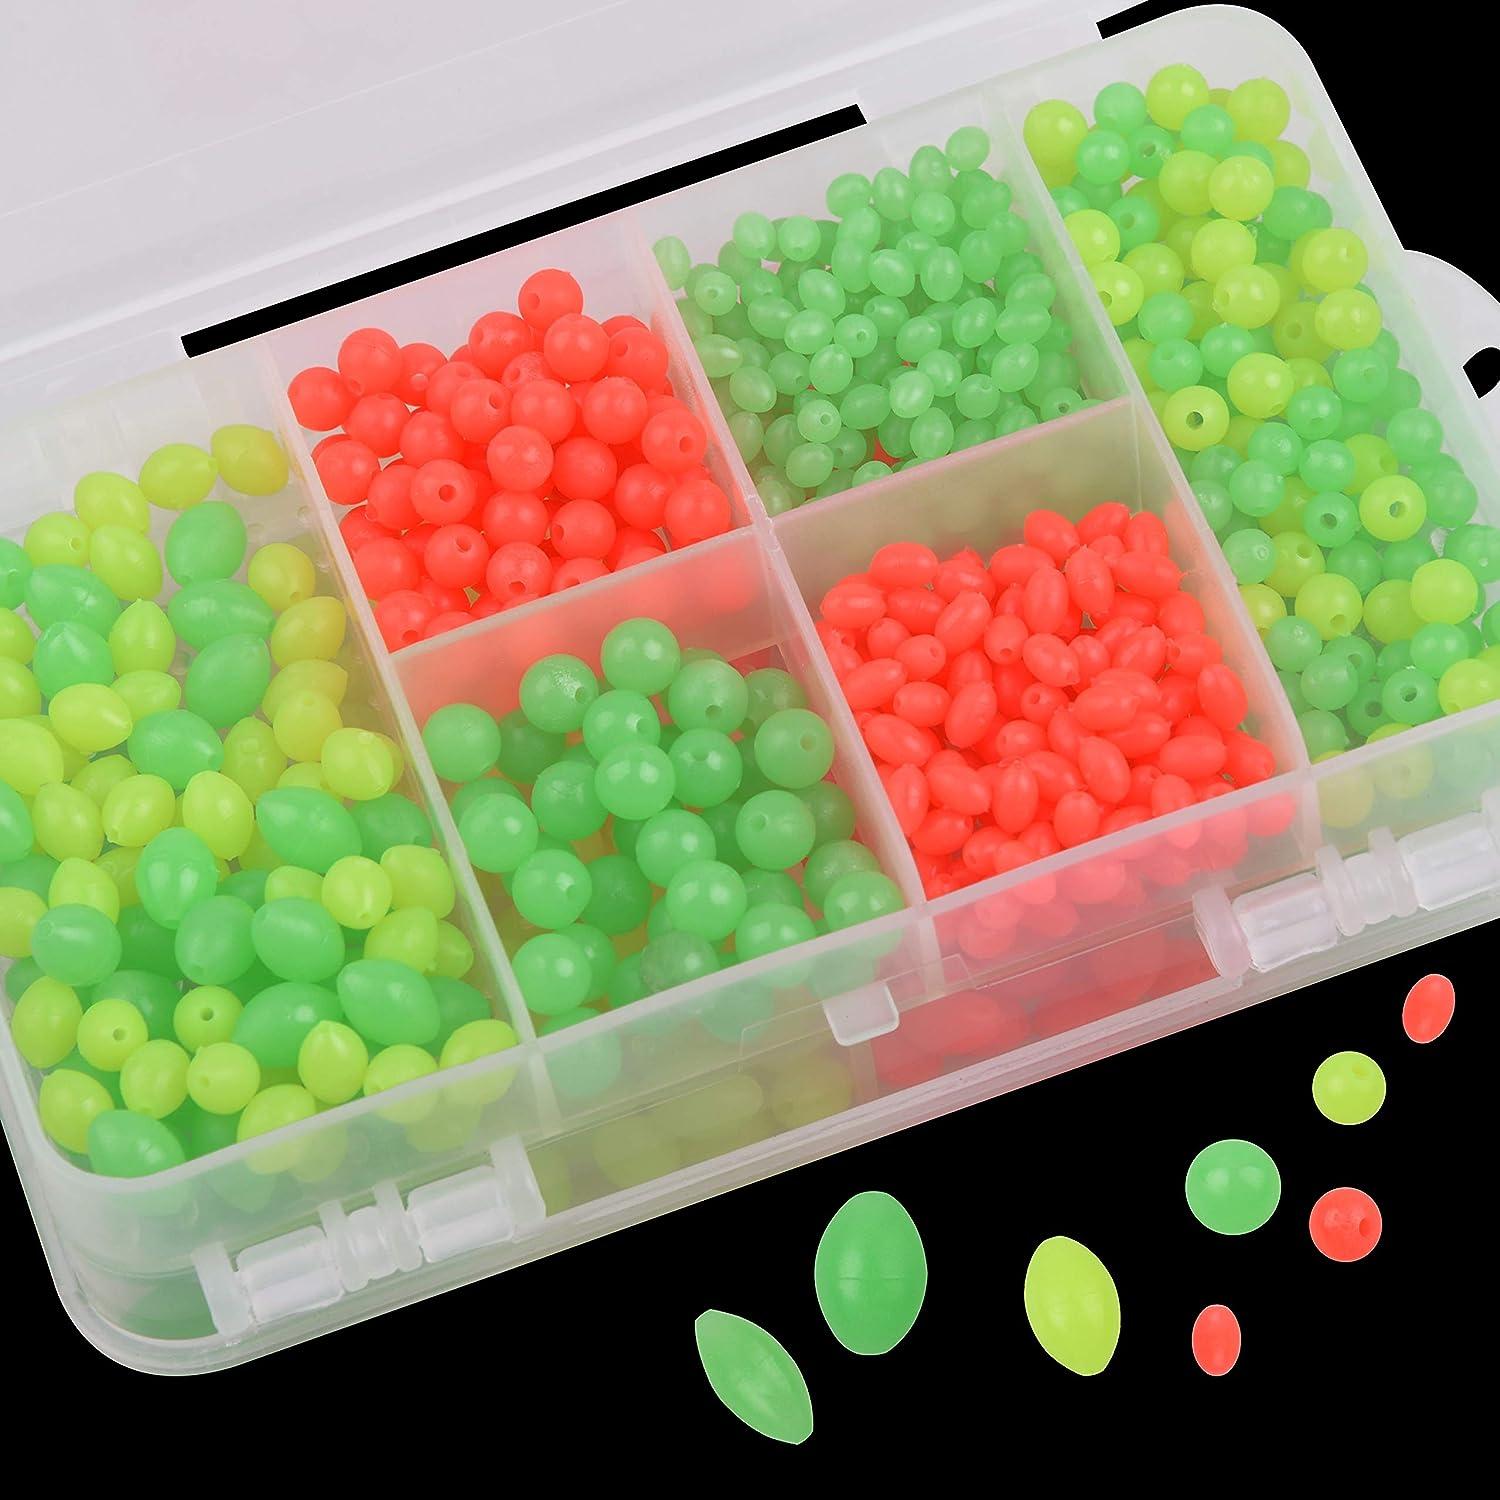 SILANON Soft Fishing Beads Assortment Kit,1000pcs Glow Beads Fishing Bait  Eggs Luminous Oval Round Plastic Rig Beads Fishing Tackle Saltwater for  Steelhead Trout